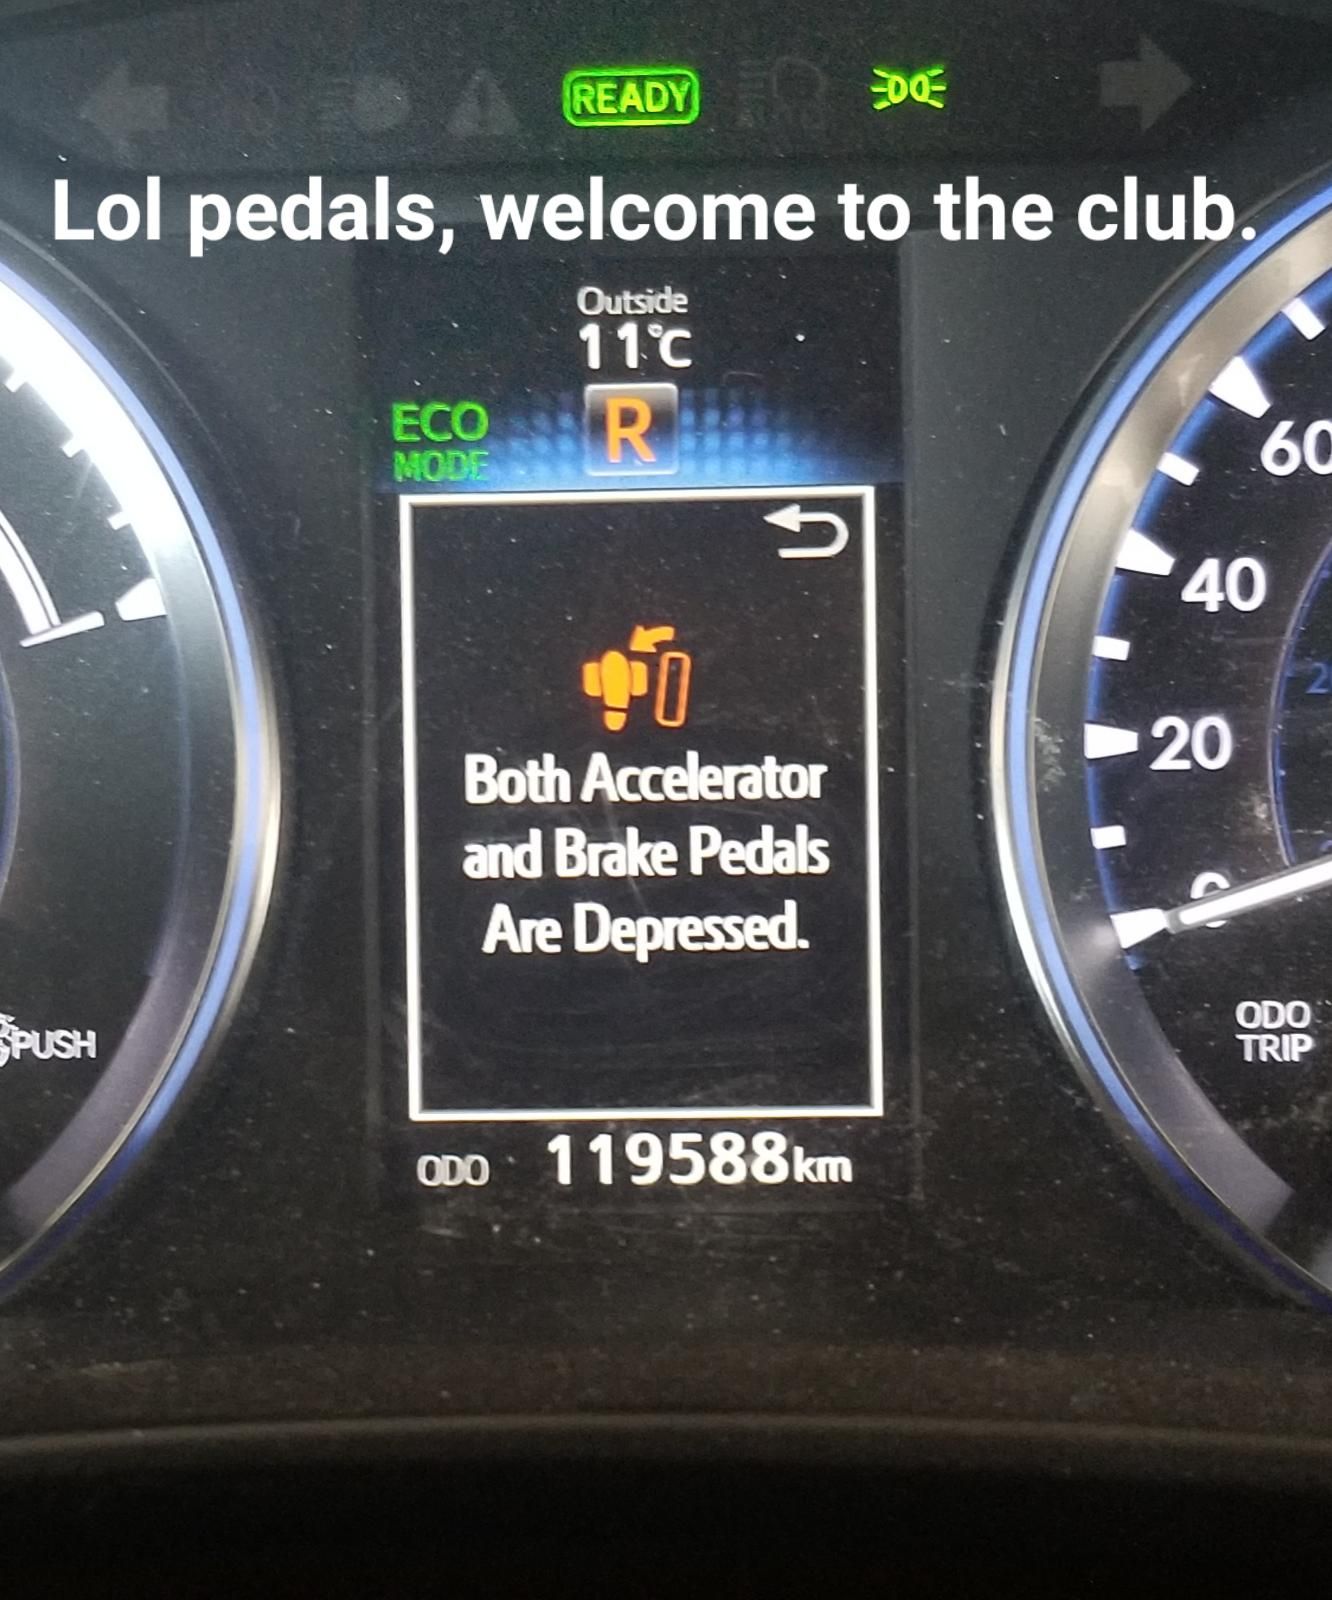 Lol pedals, welcome to the club.